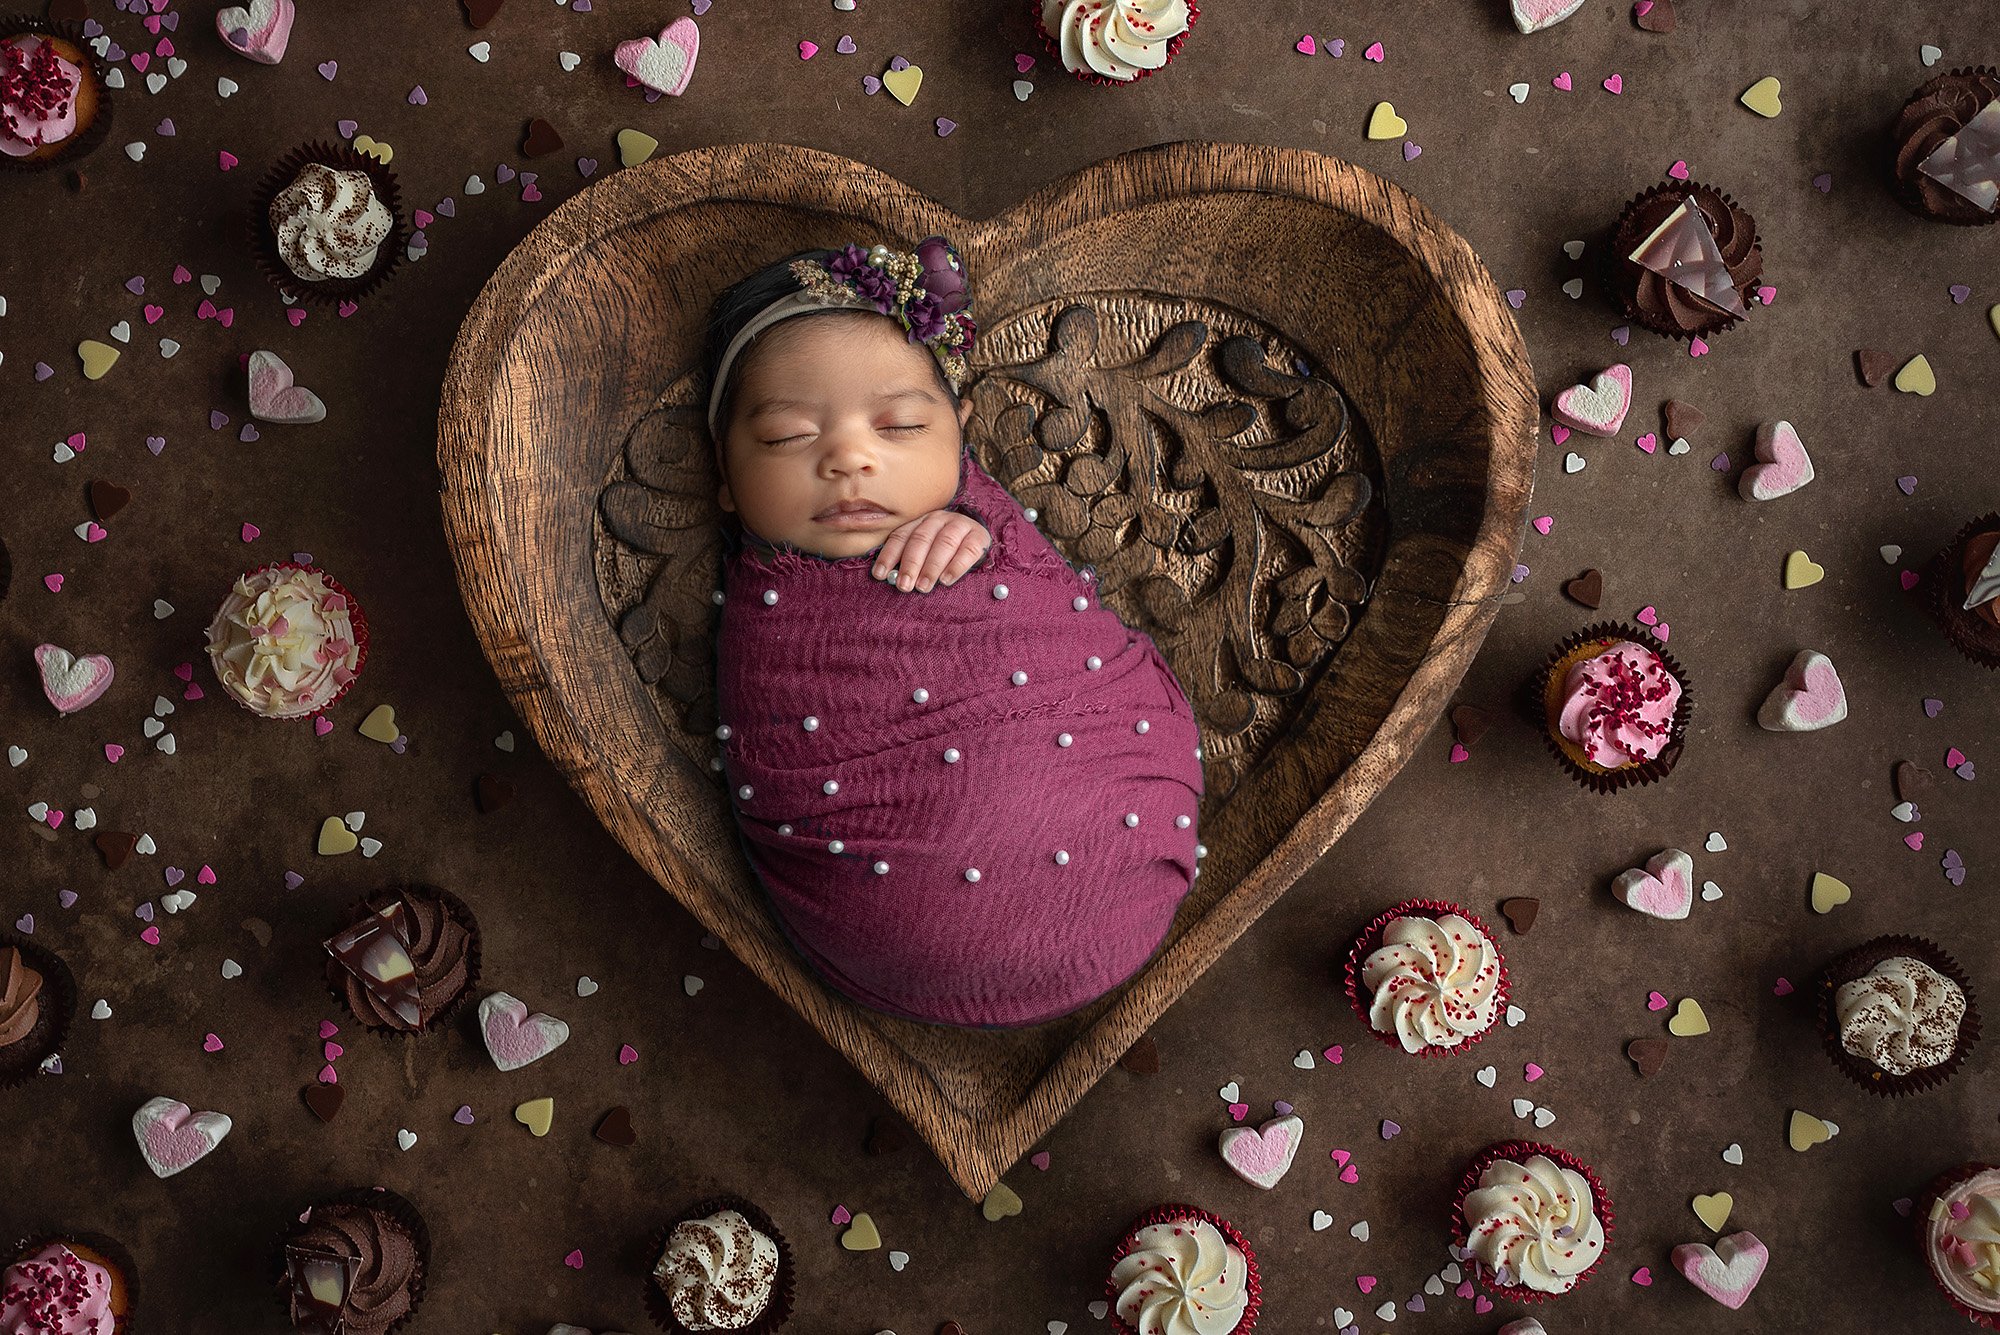 sleeping newborn baby girl swaddled in magenta wrap with pearls wearing purple floral headband laying in wooden heart bowl surrounded by cupcakes and heart candies